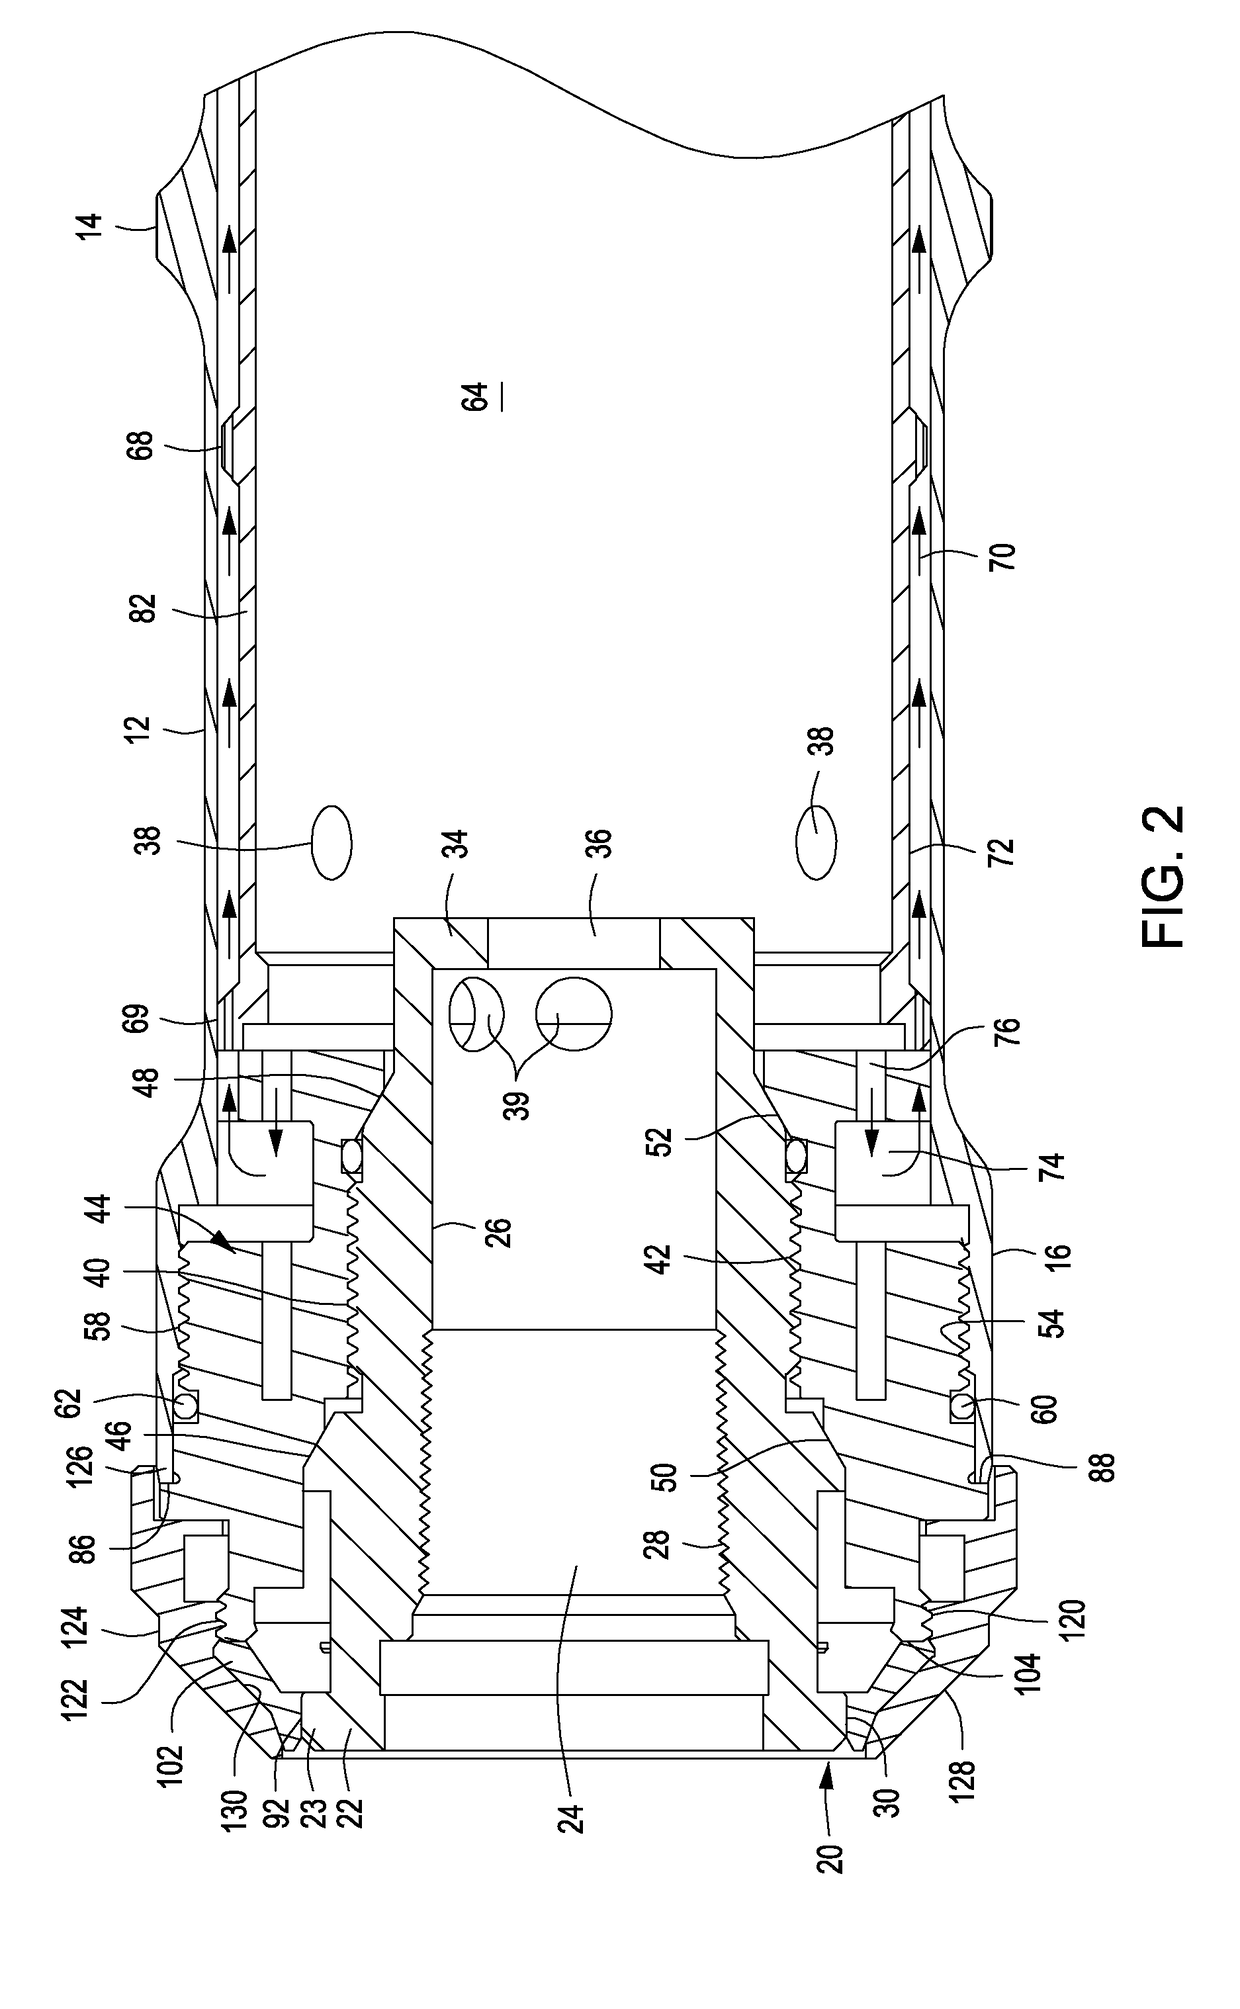 Firearm noise and flash suppressor having ratcheted collet locking mechanism